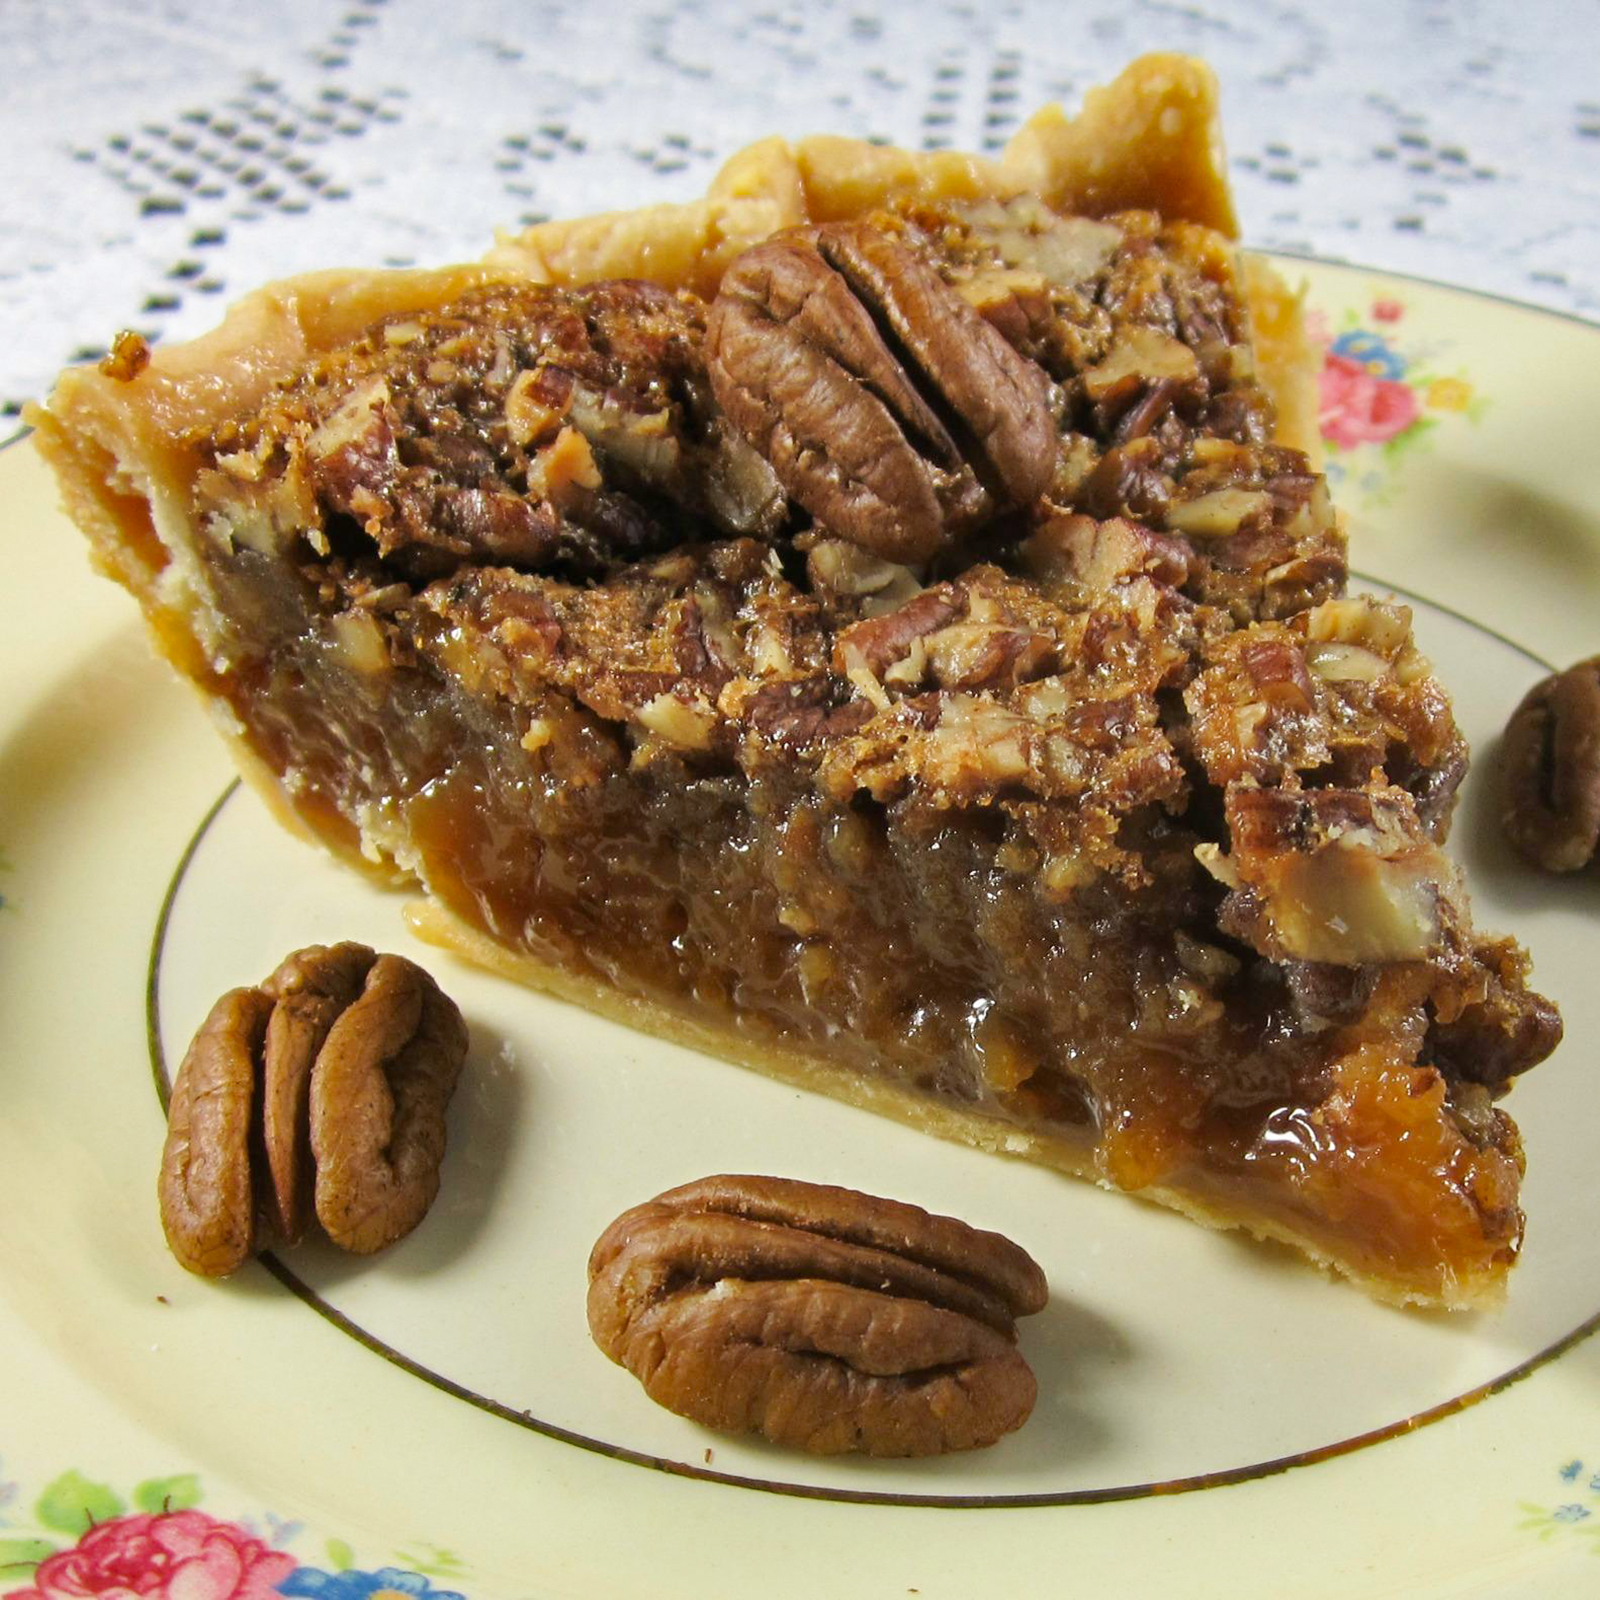 close up view of a slice of Kentucky Pecan Pie on a plate with pecans